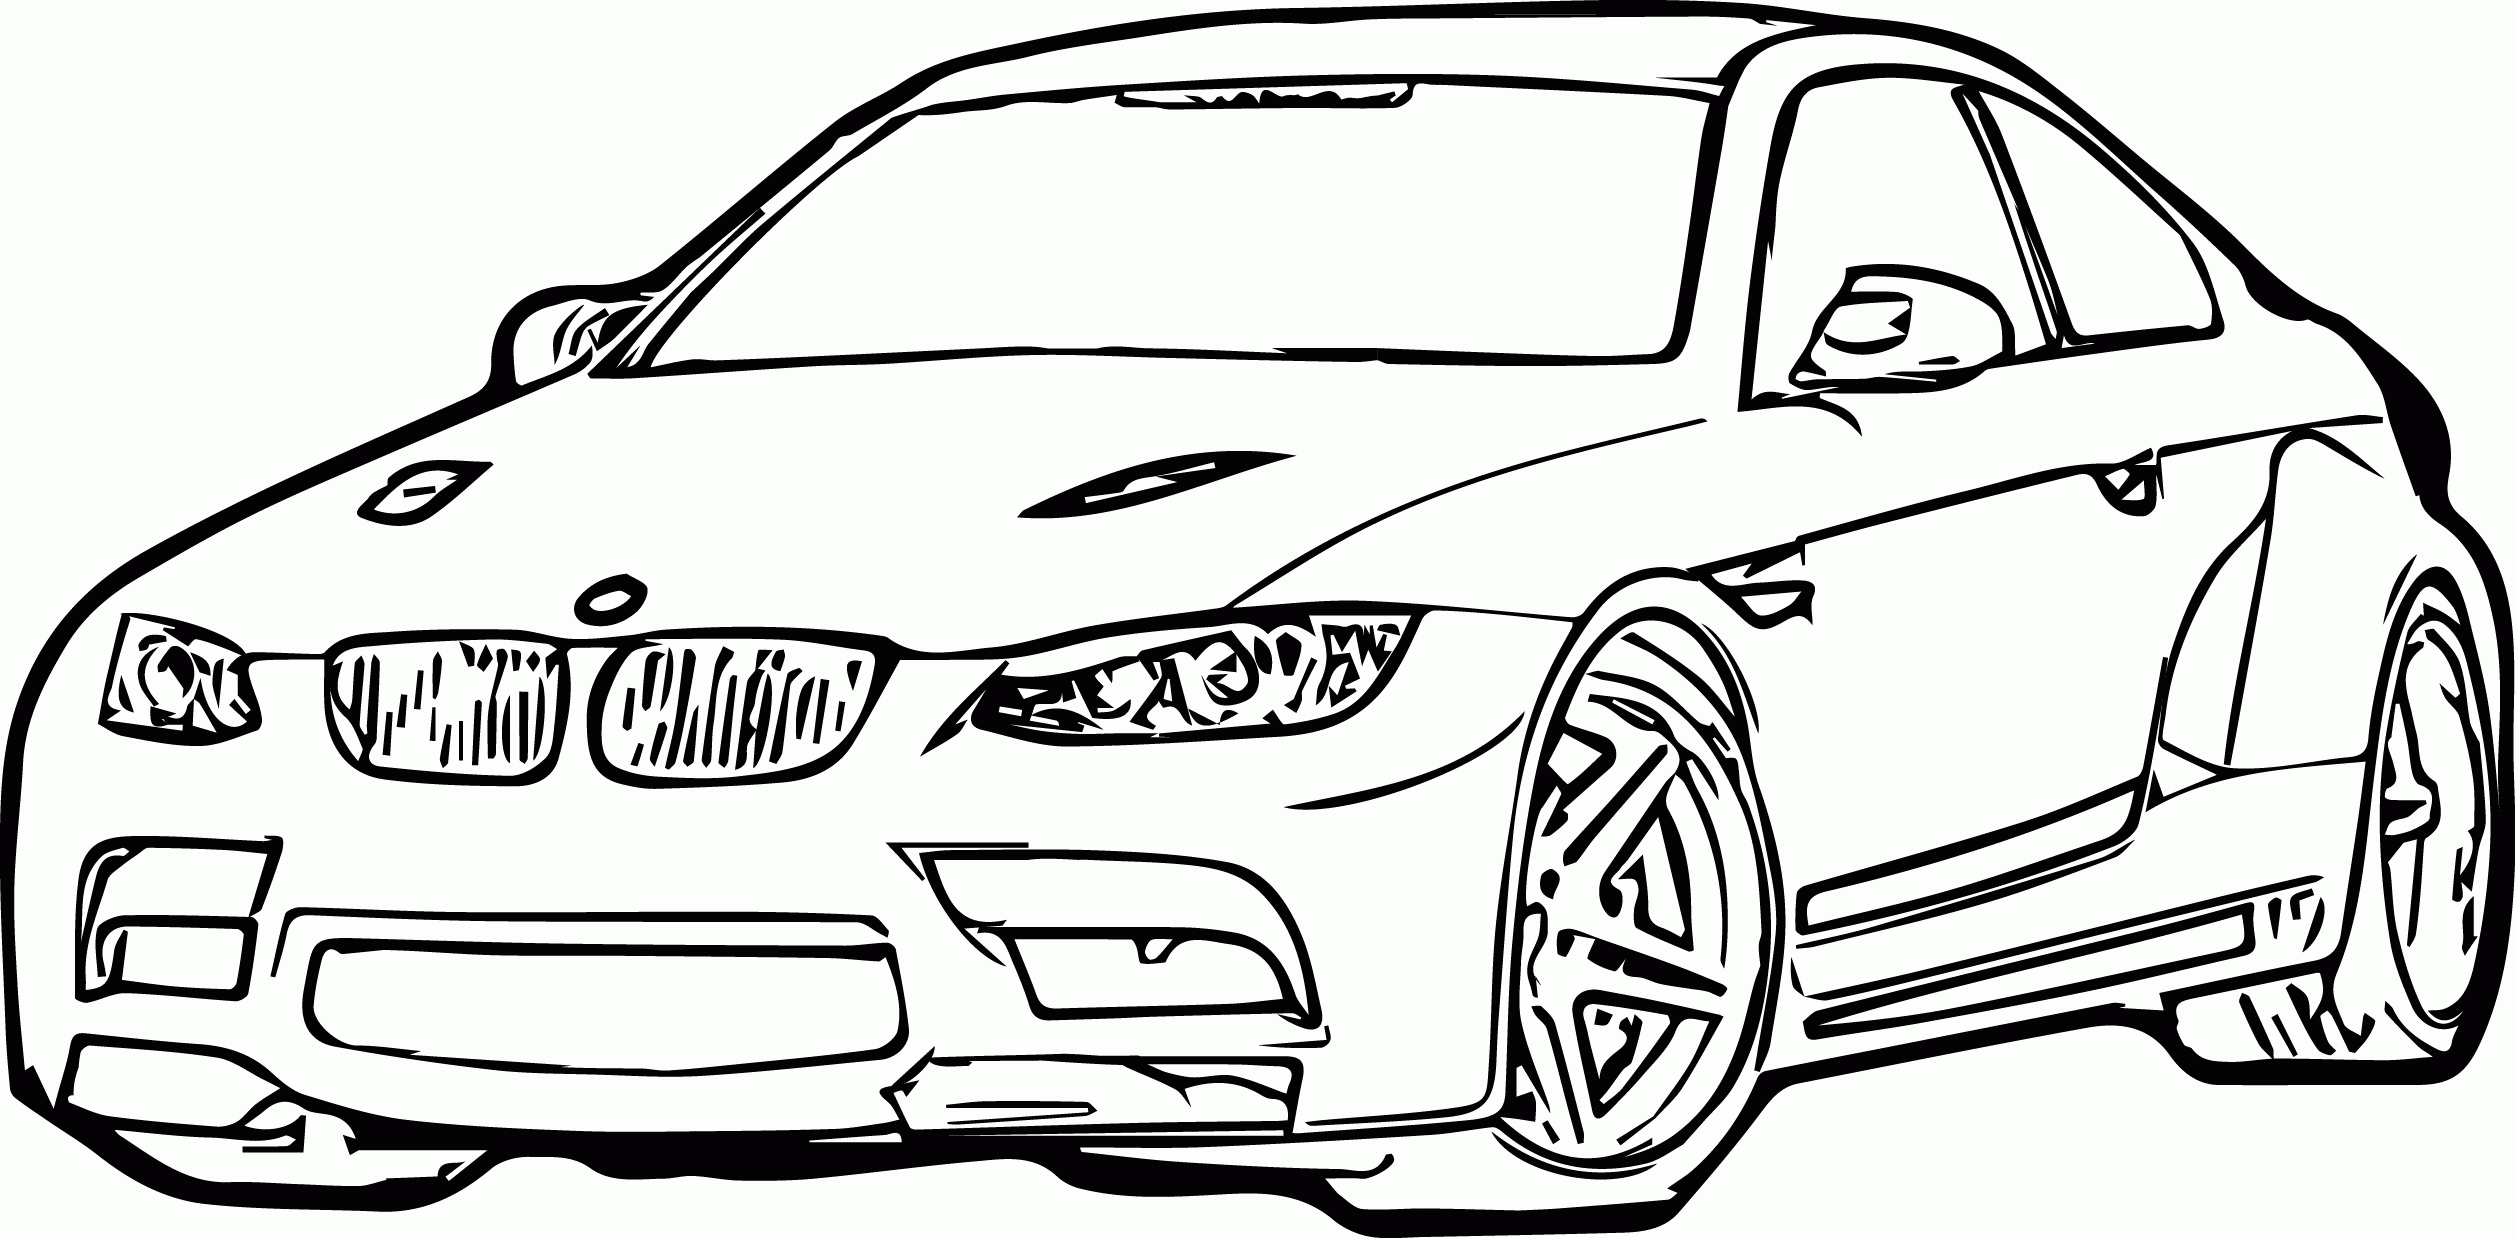 Bmw Car Coloring Pages - Coloring Home